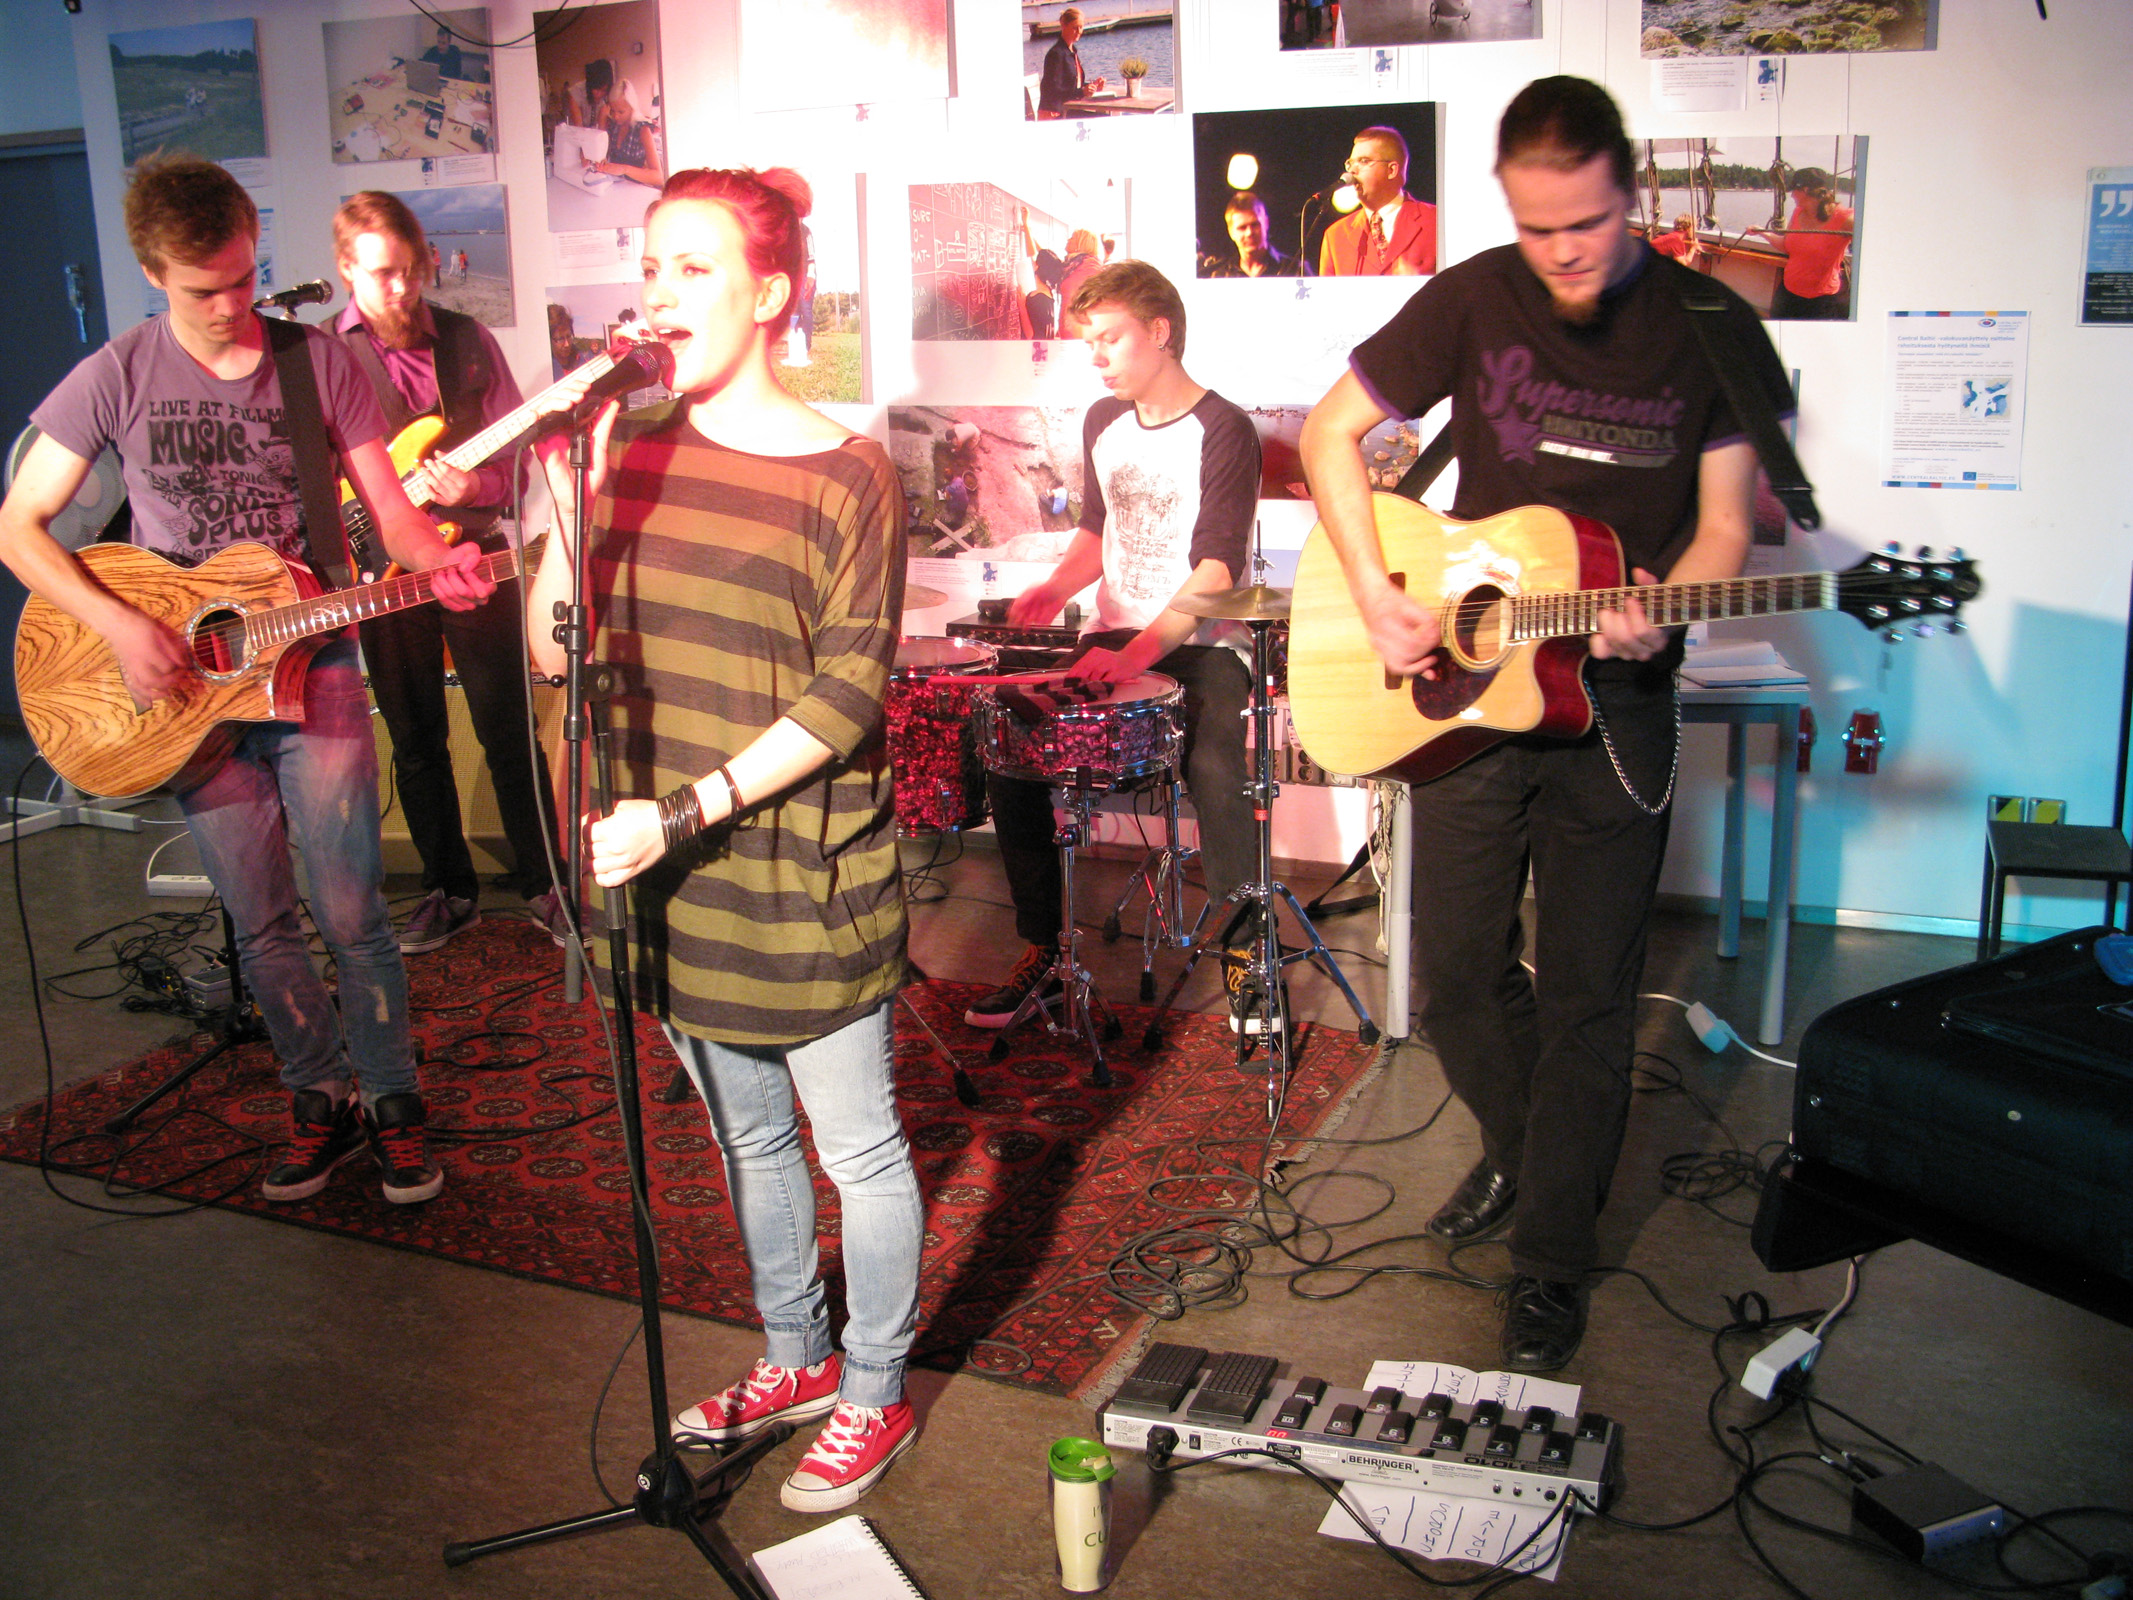 a man singing with other young men playing guitars and singing in the background